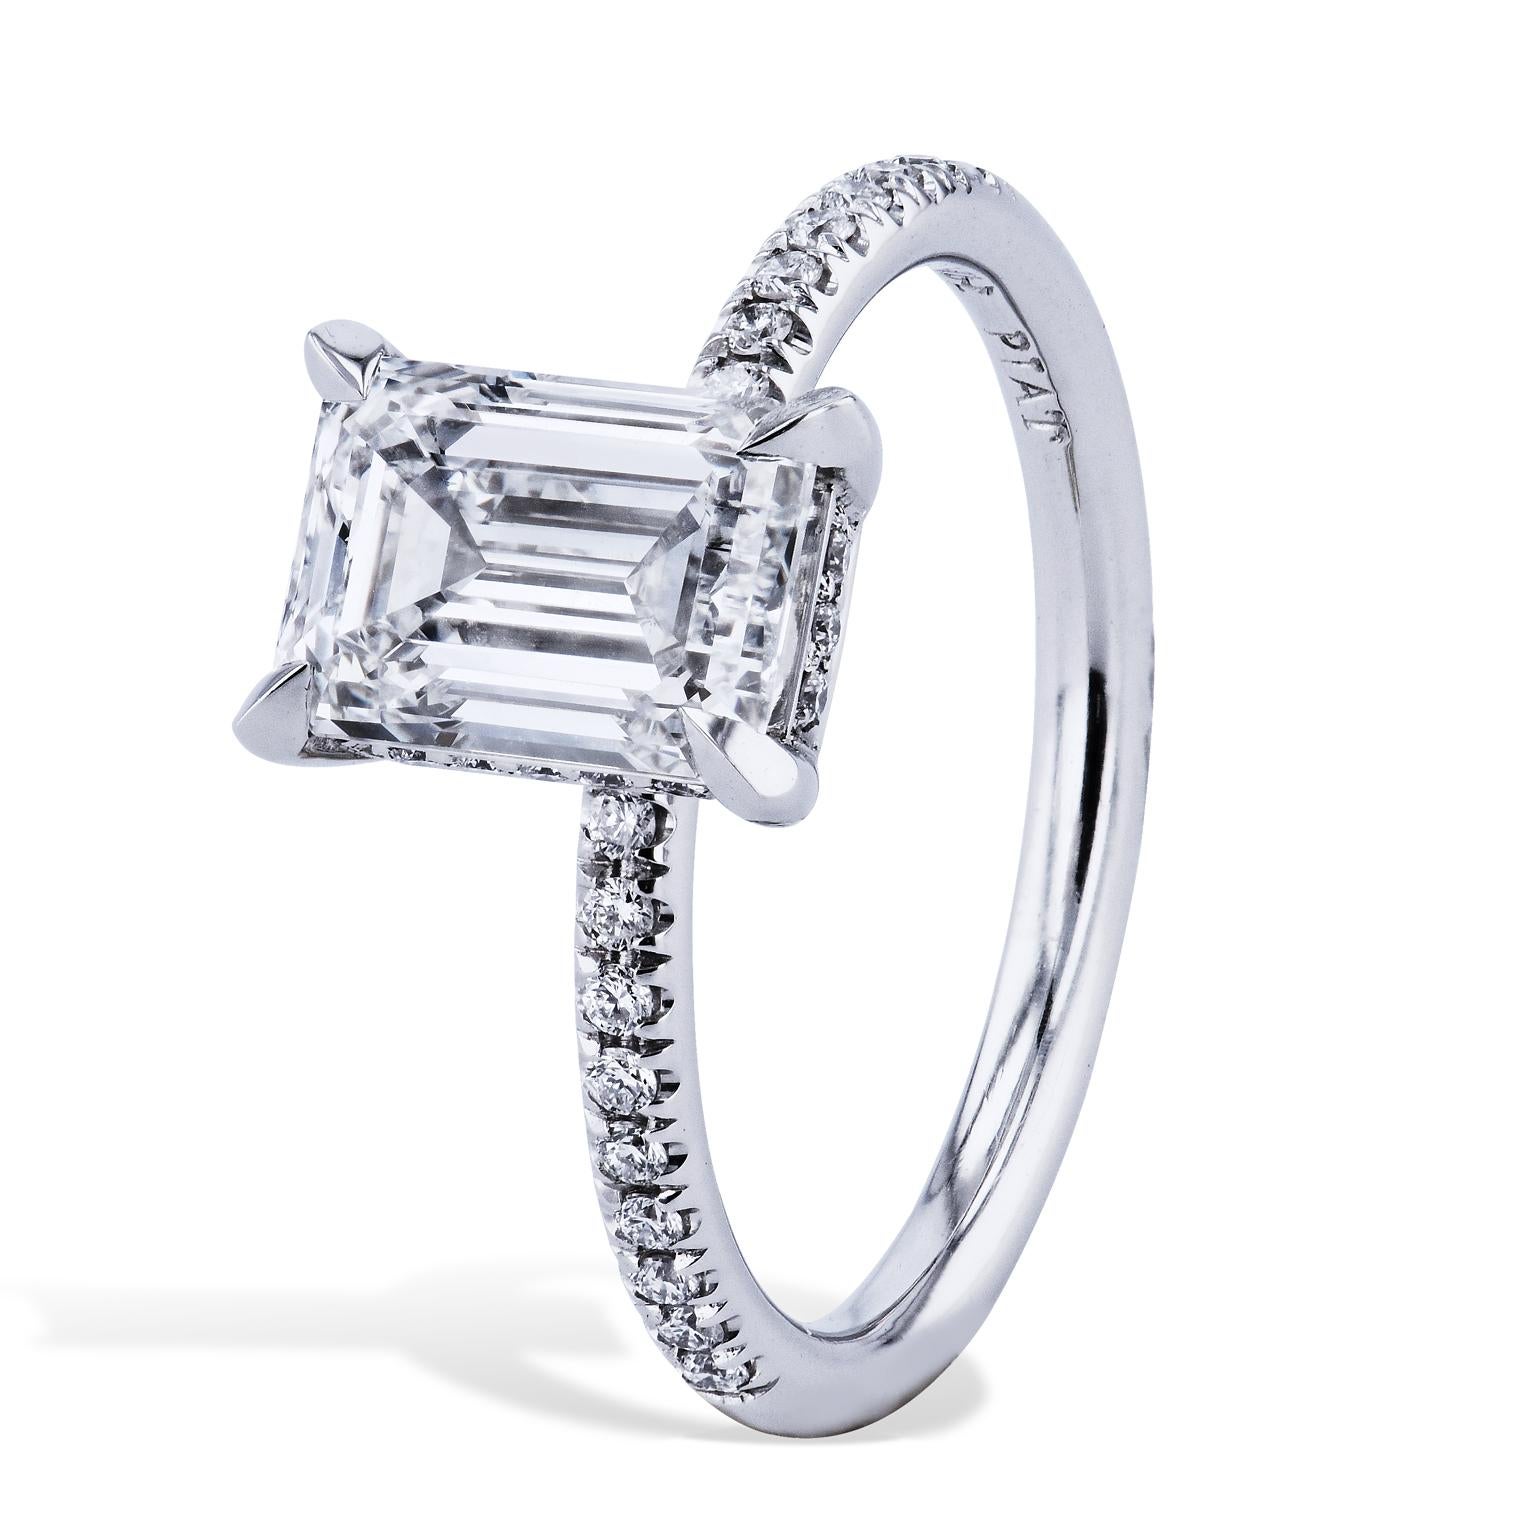 Handmade with care, this exquisite 2.01 carat emerald cut diamond ring (GIA certified/G-SI1 EX, EX) will make sure she stands out from the crowd, featuring 0.06 carats of pave set diamonds (G-VS) in the basket setting and 0.13 carats of pave set